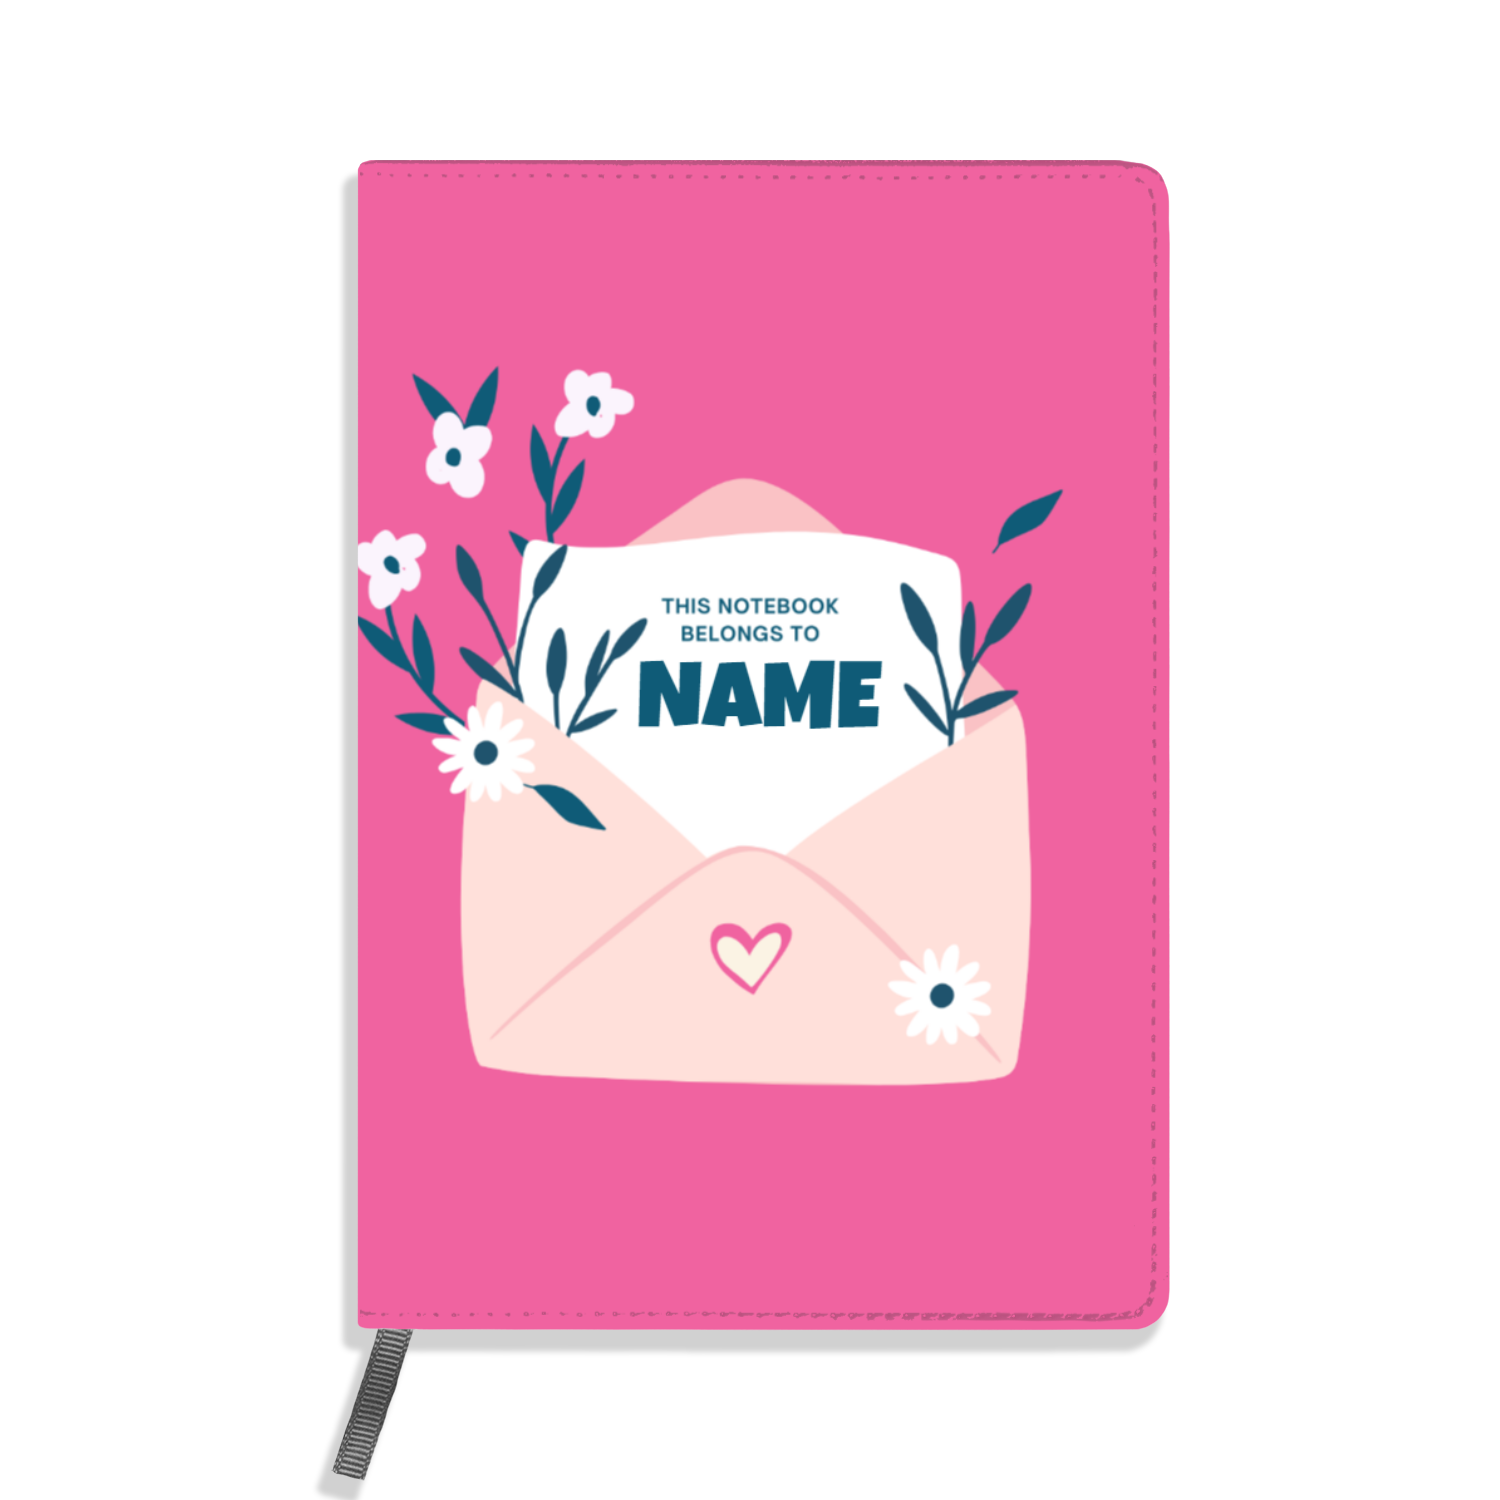 Personalized Notebook/Journals - Personalized Floral Pink Journal 